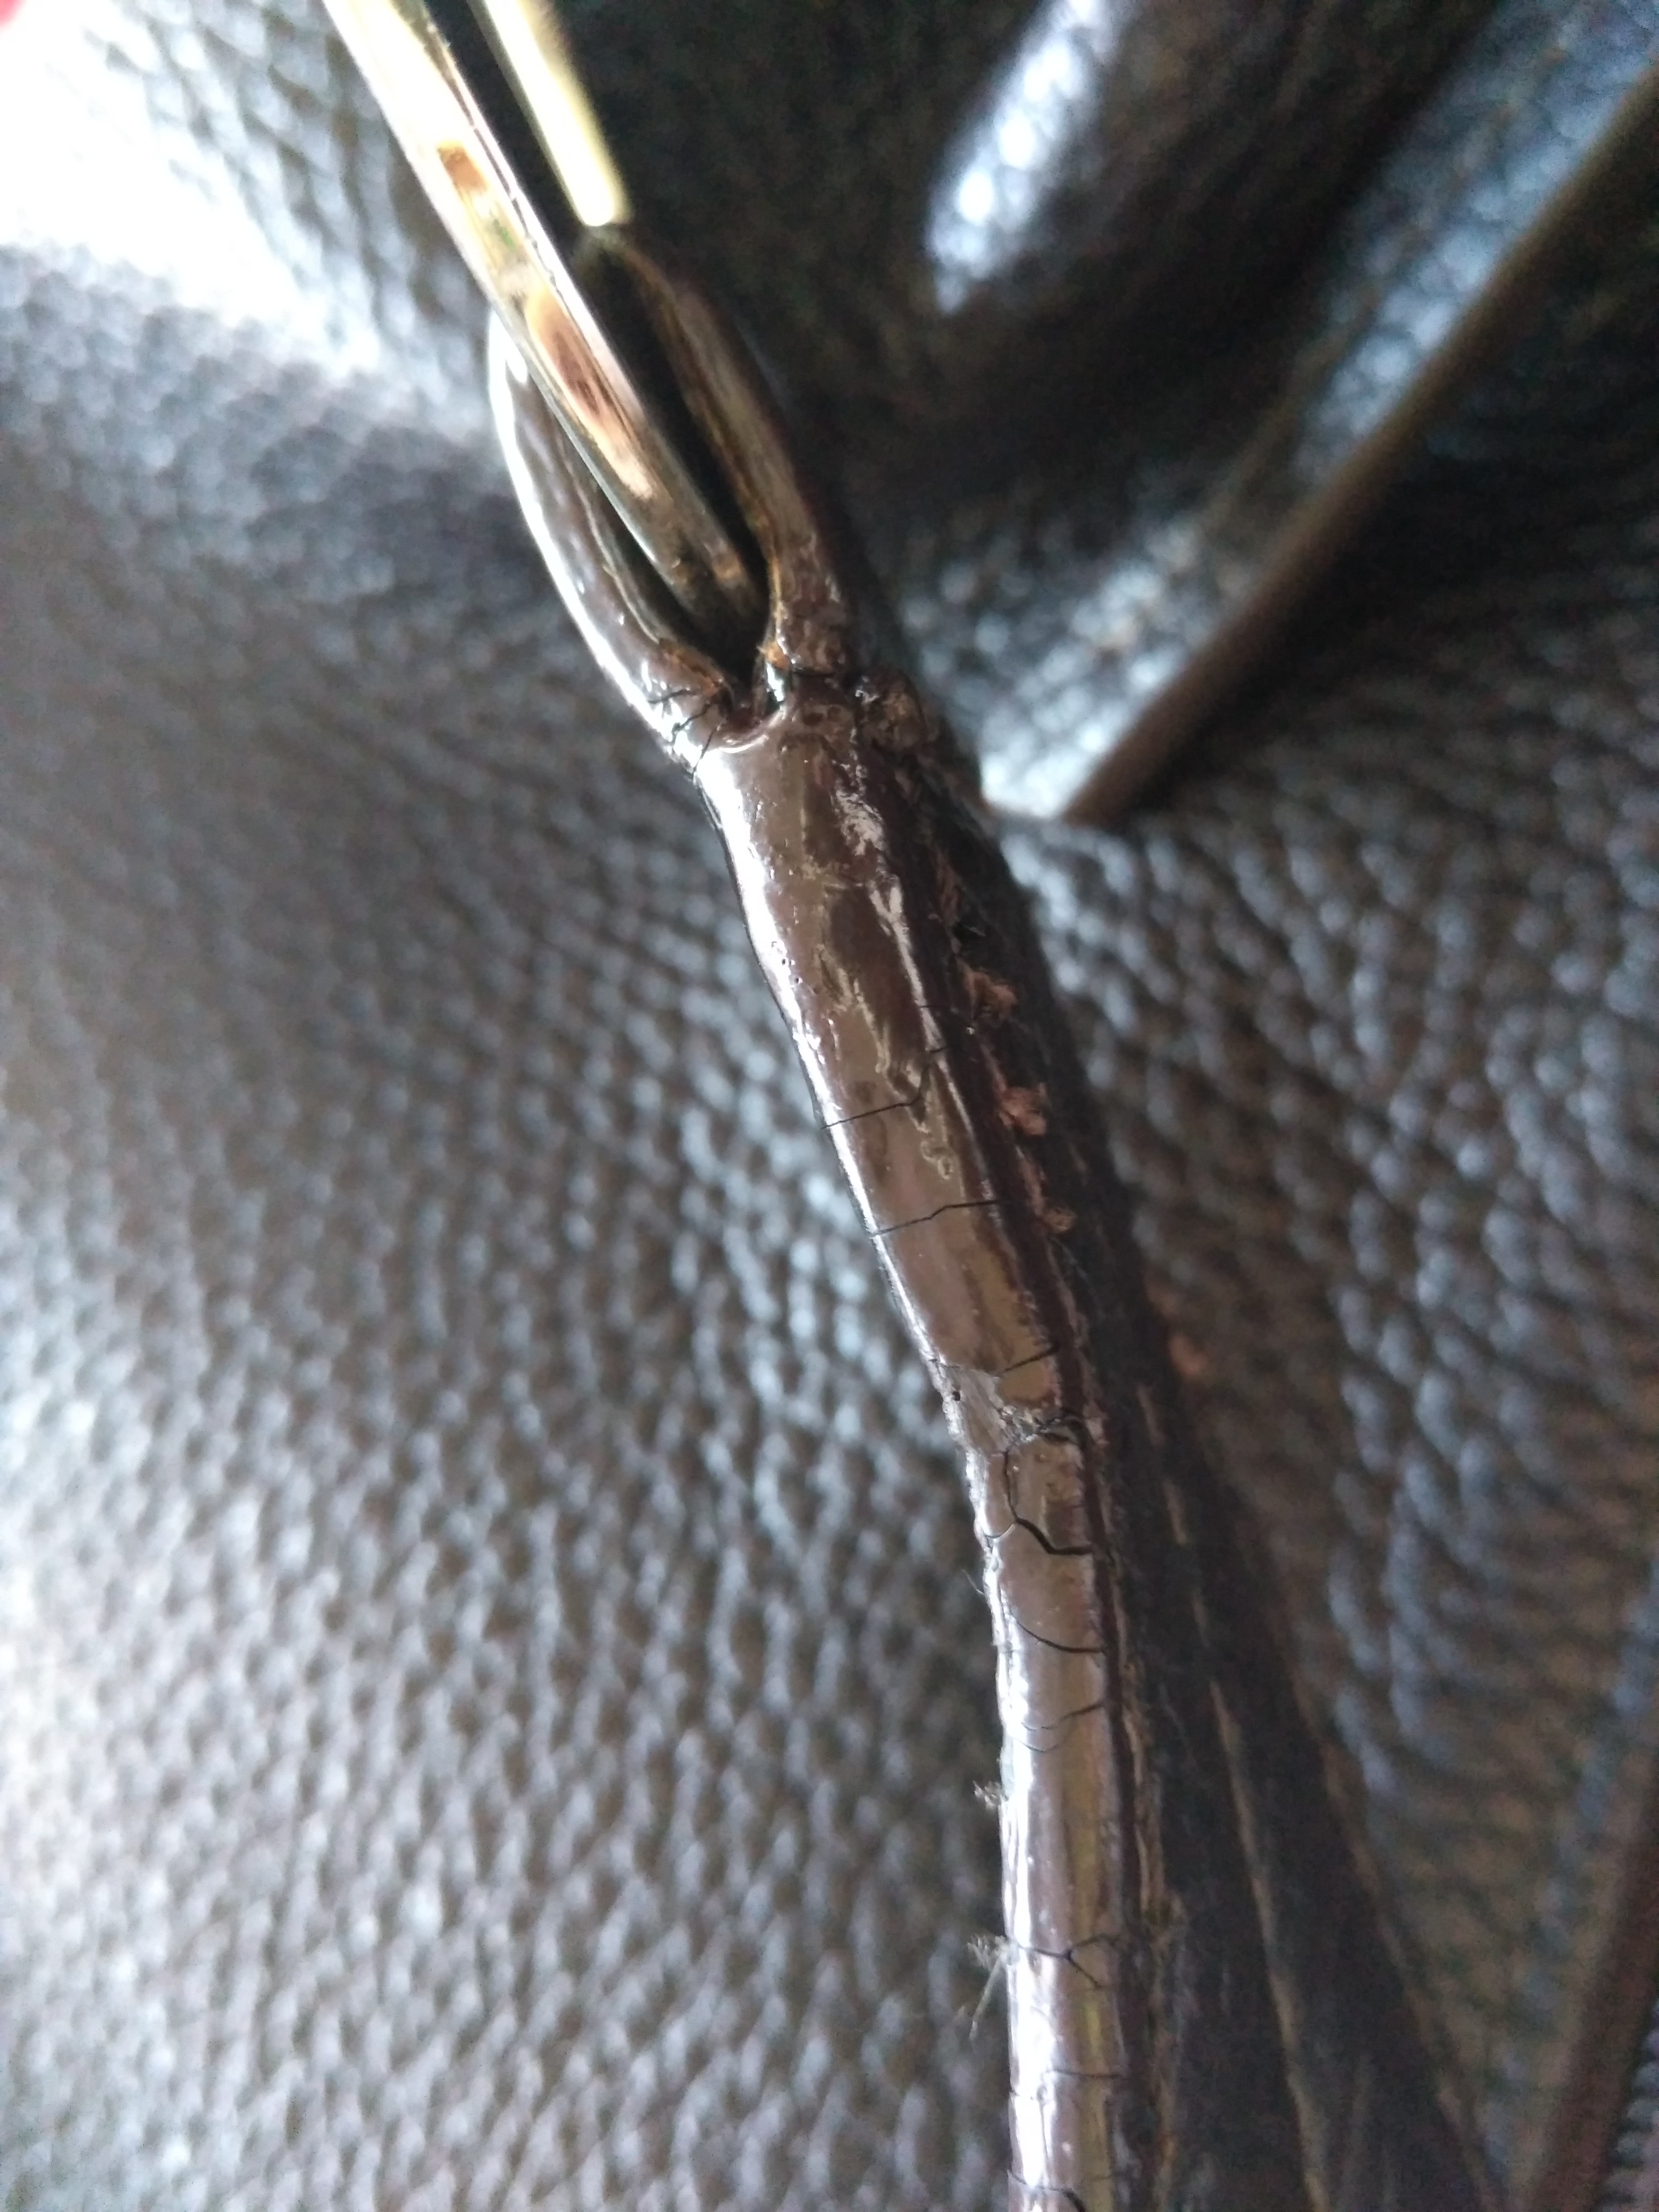 How can i fix my mom's bag - Repairing edges - How Do I Do That? 